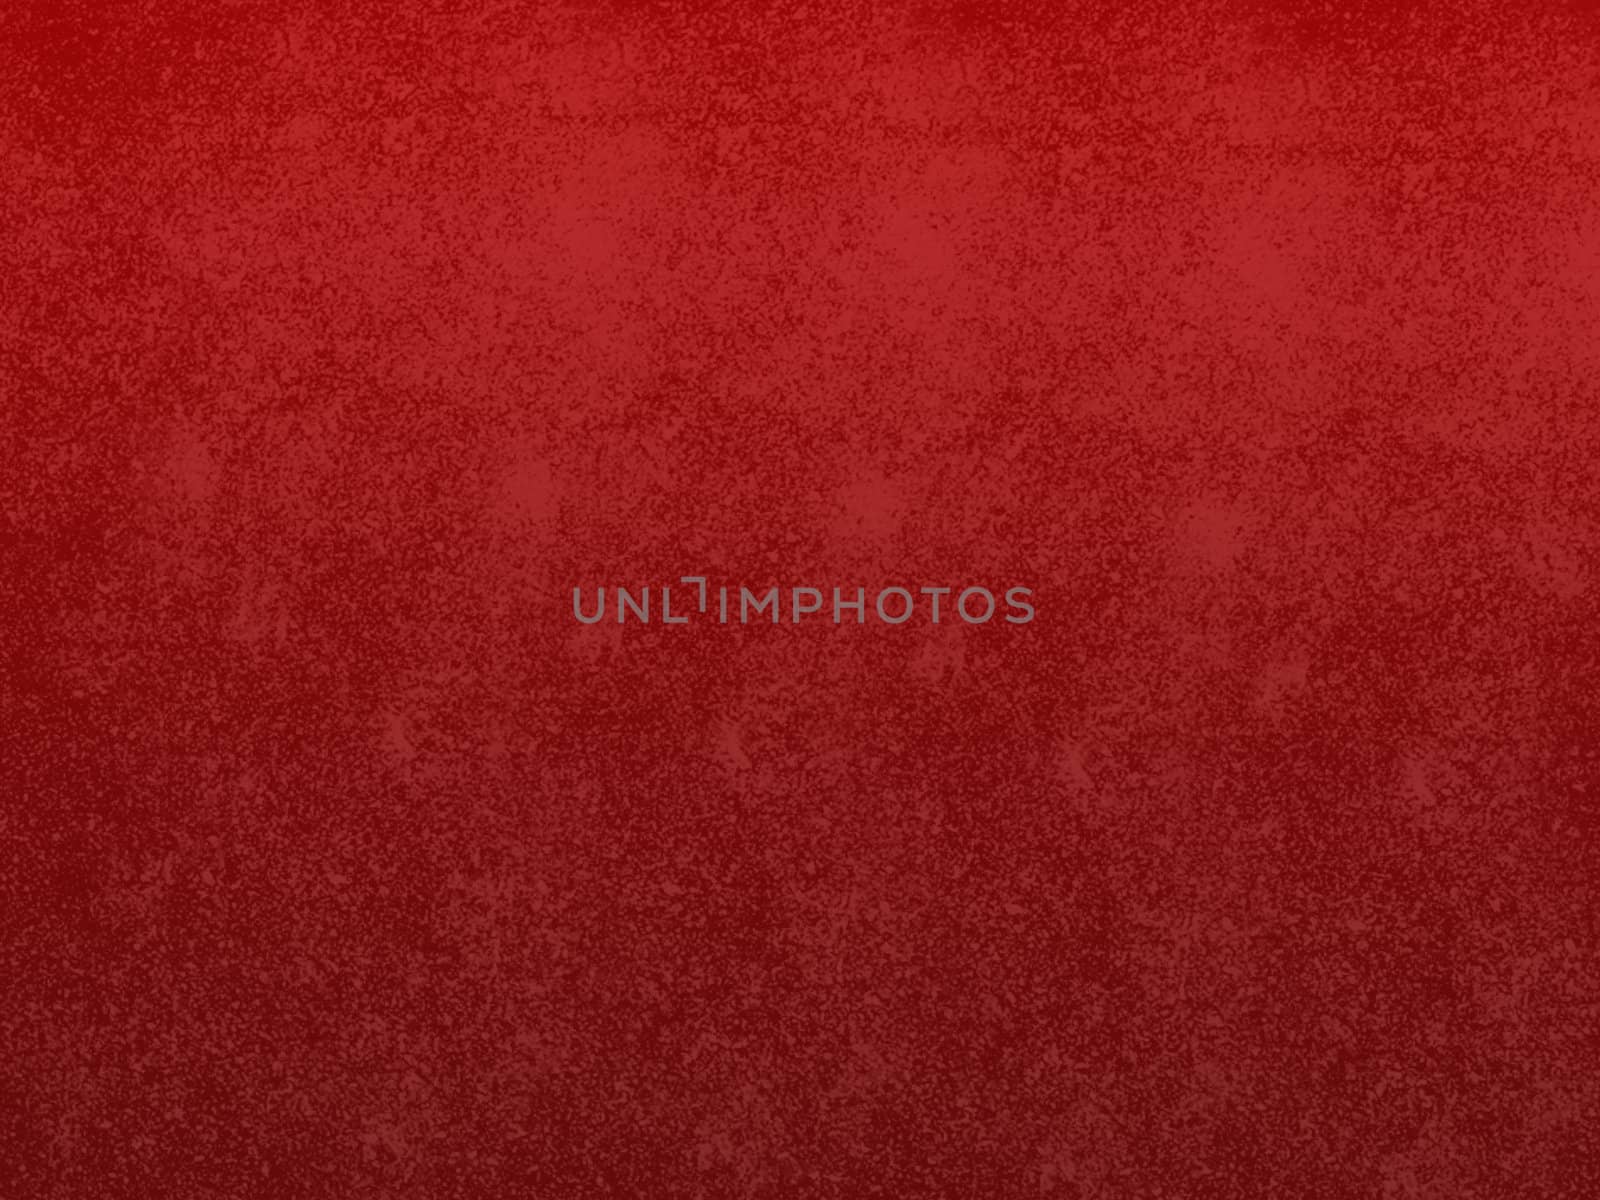 old red grunge background by compuinfoto